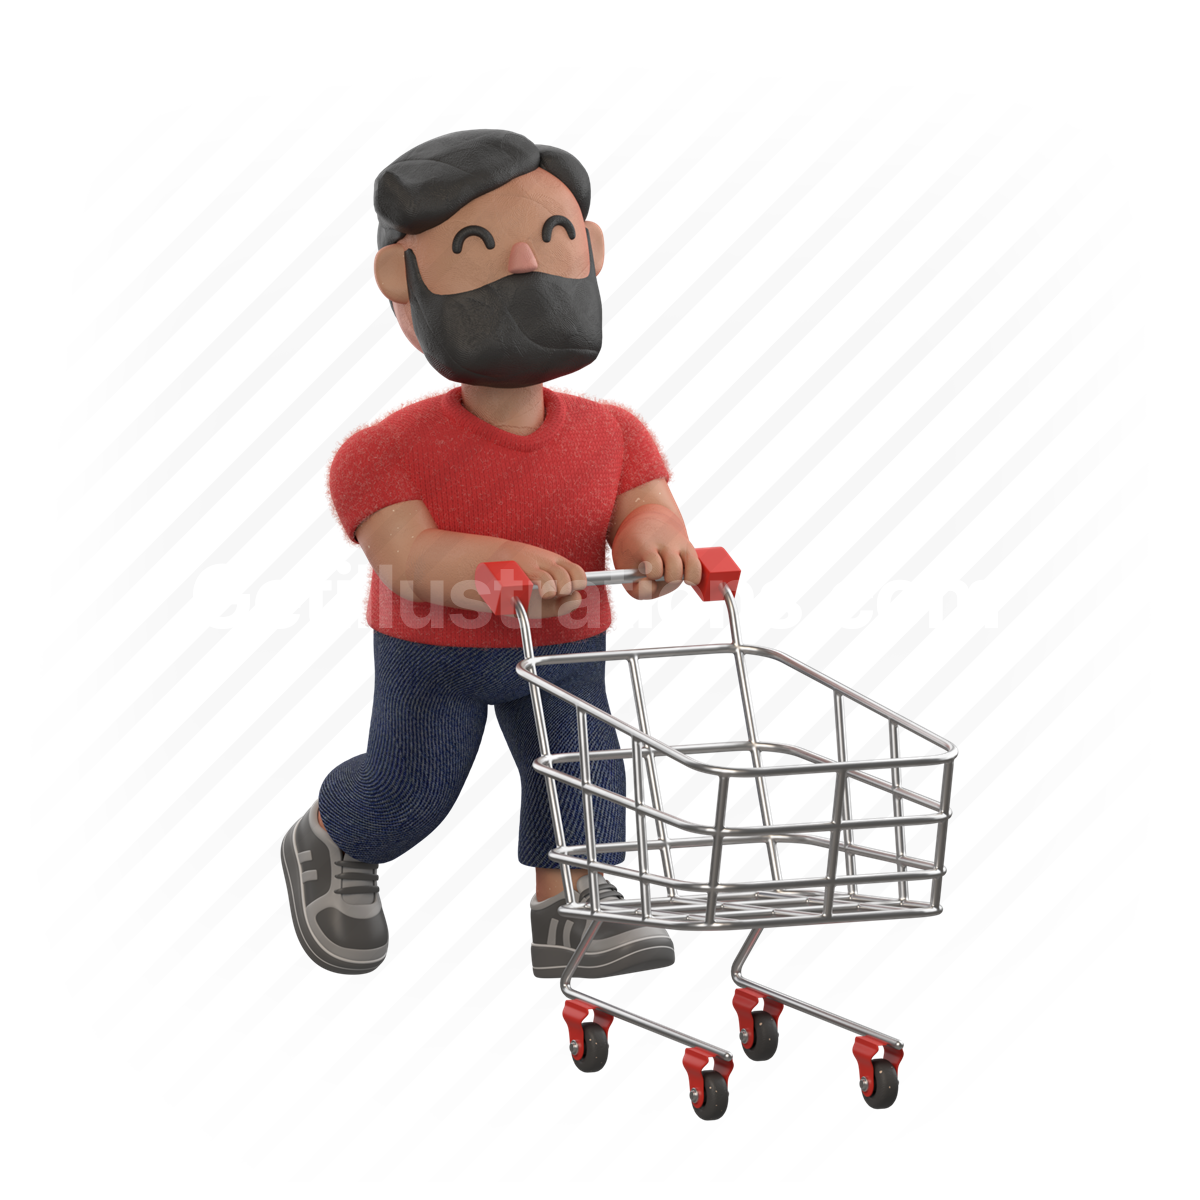 man, people, person, shopping, shop, store, basket, cart, ecommerce, commerce